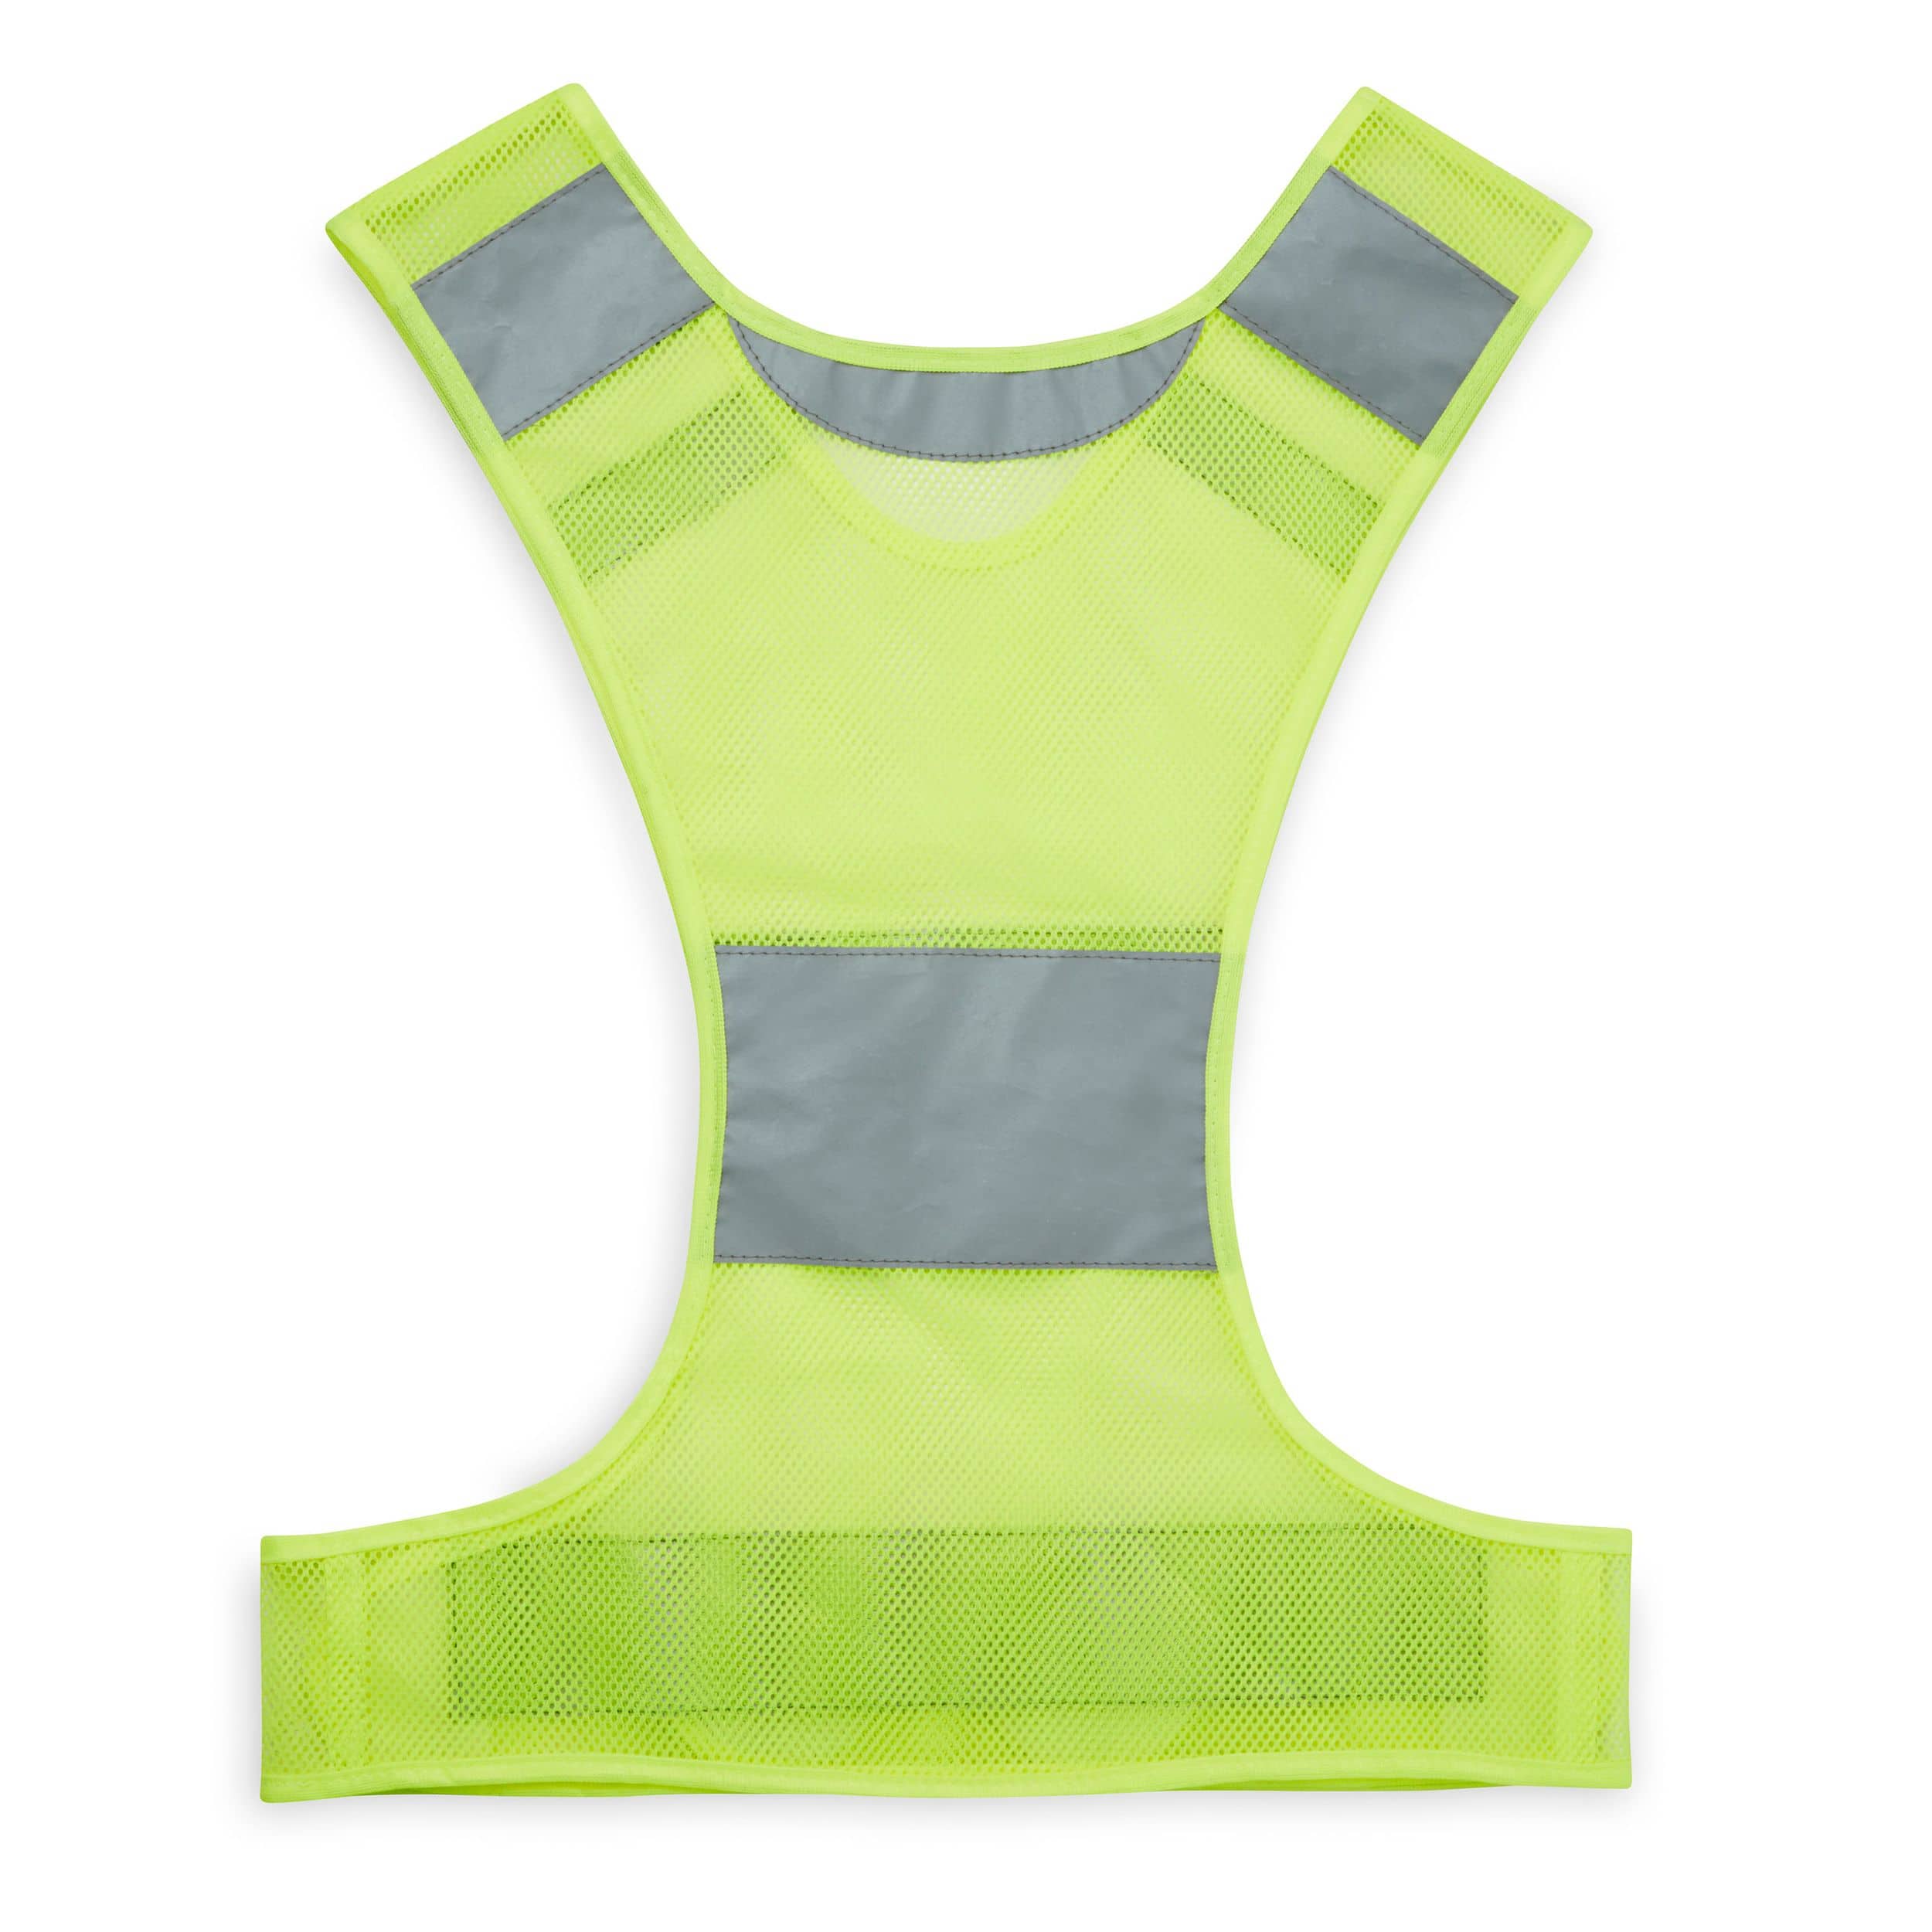 https://media-www.canadiantire.ca/product/playing/exercise/exercise-accessories/1841612/gaiam-reflective-running-vest-eb1e5428-48bc-4c03-a04e-1b2f9ca8ddc1-jpgrendition.jpg